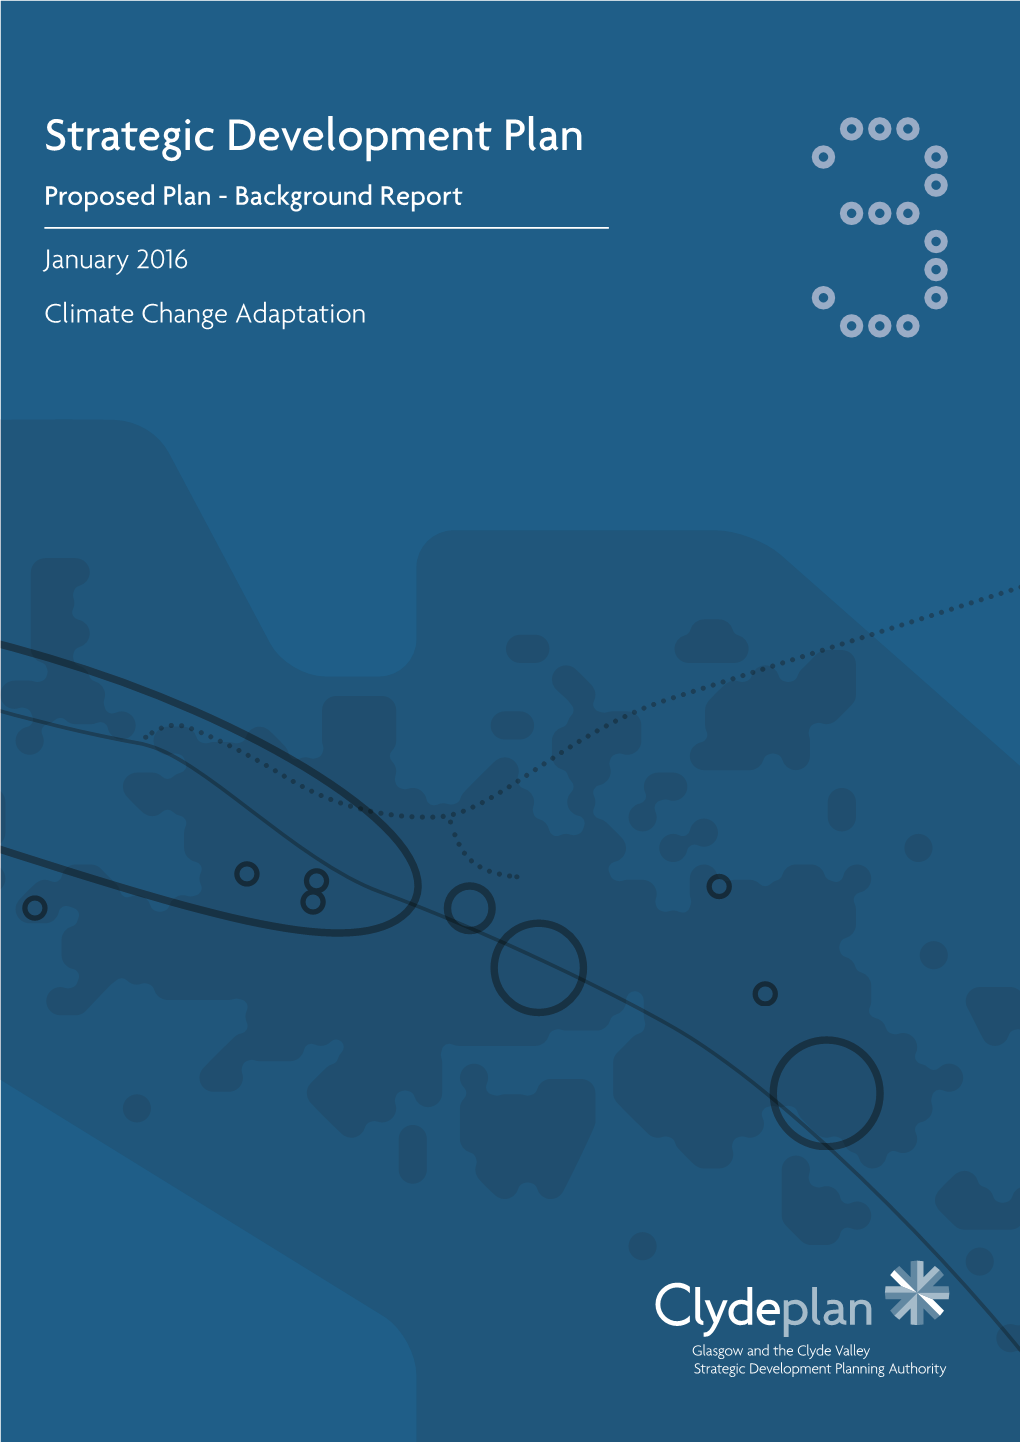 STRATEGIC DEVELOPMENT PLAN BACKGROUND REPORT 3 CLIMATE CHANGE ADAPTATION in GLASGOW and the CLYDE VALLEY January 2016